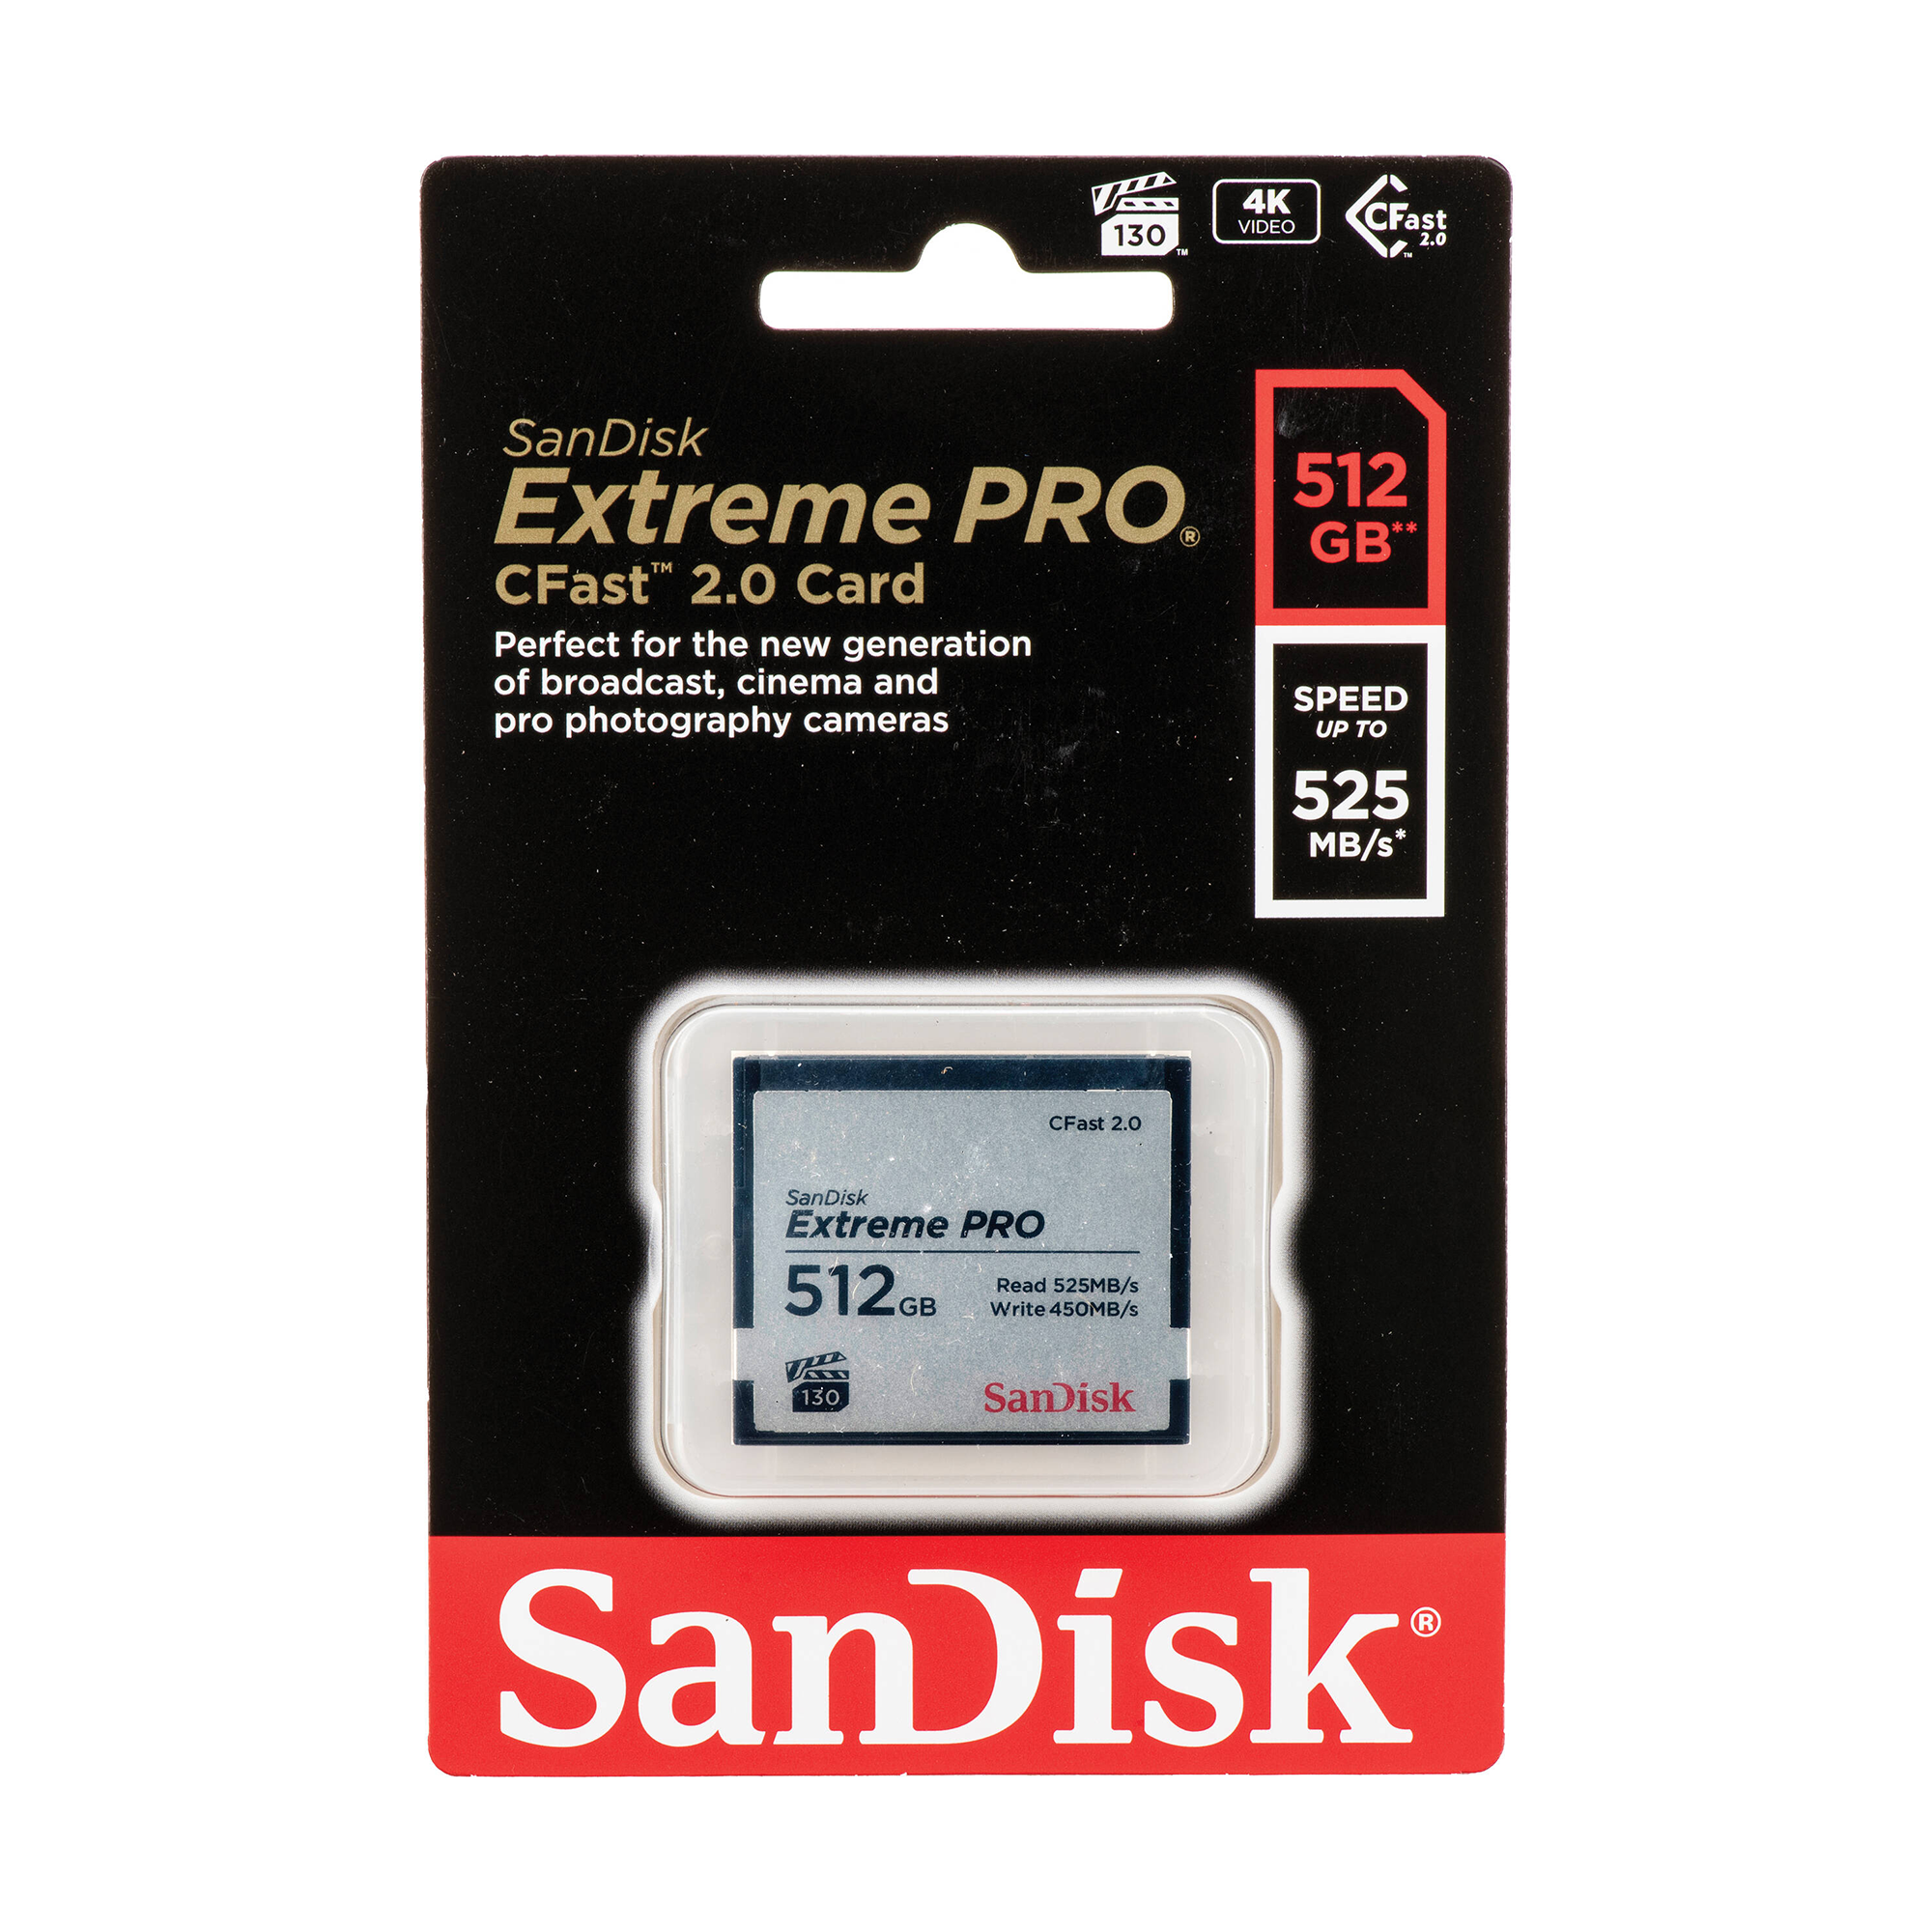 SanDisk 512GB Extreme PRO CFast 2.0 Memory Card